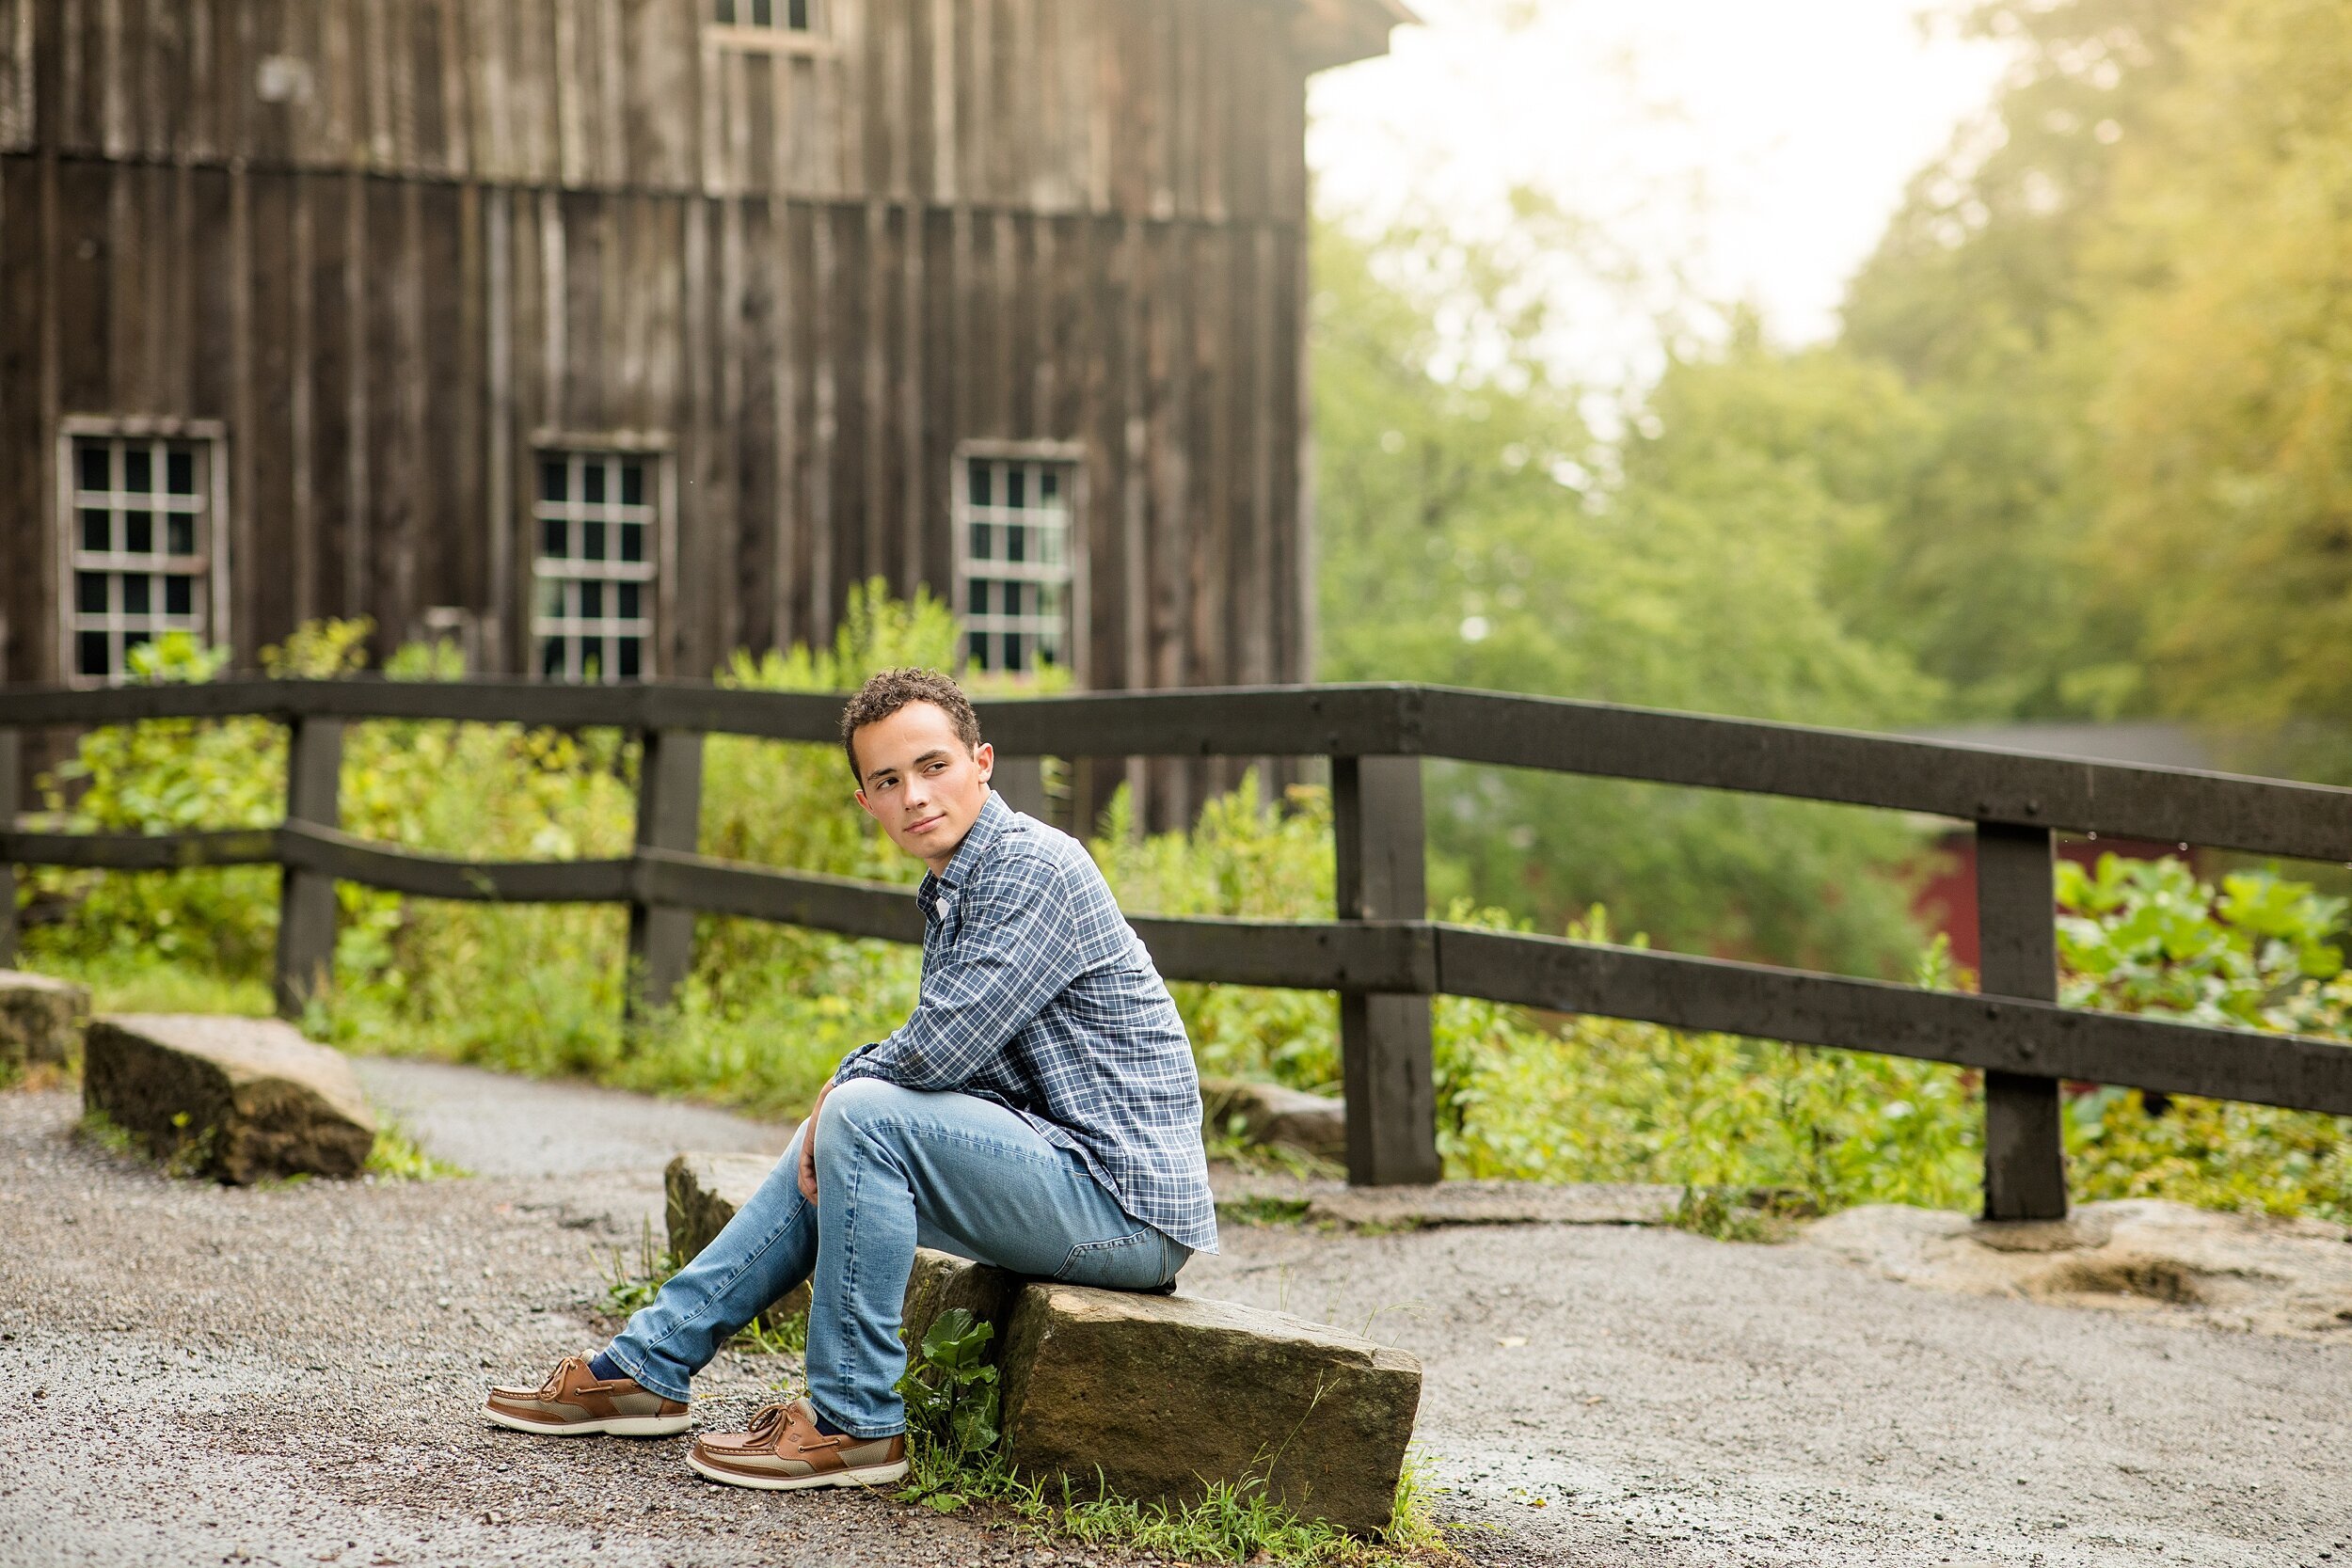 mcconnell's mill senior photos, cranberry township senior photographer, pittsburgh senior photographer, locations for senior photos pittsburgh